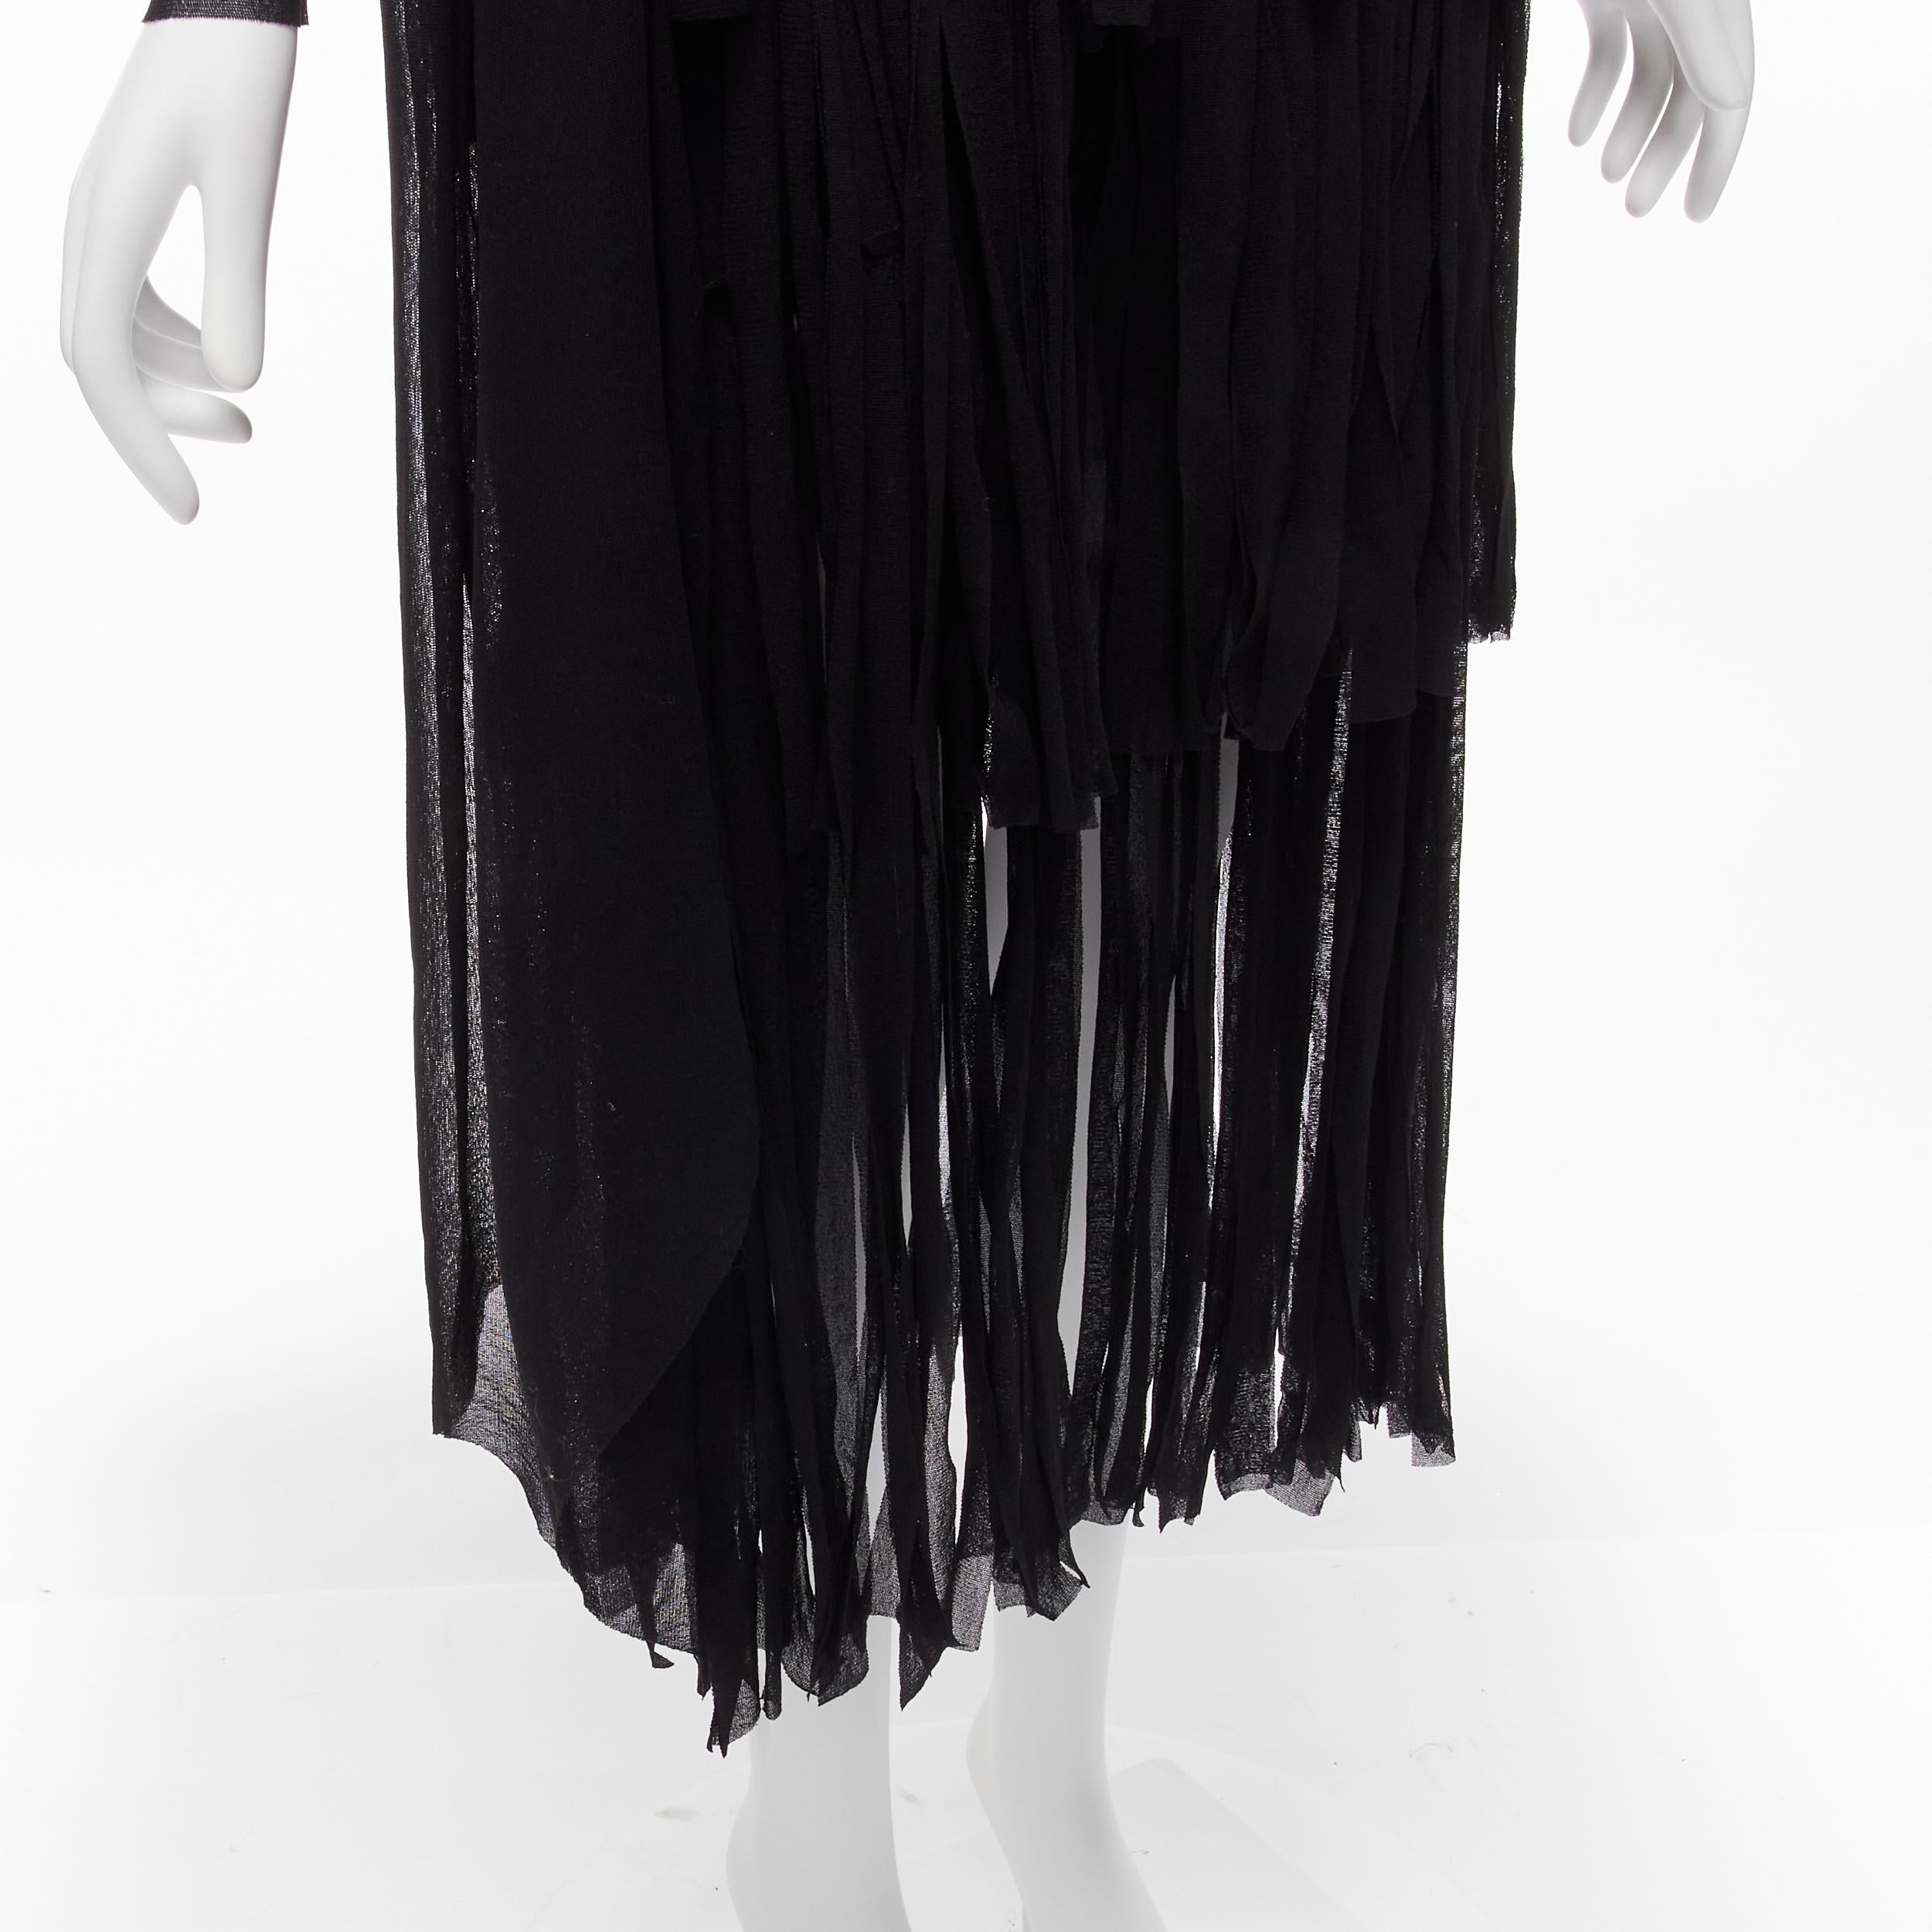 JEAN PAUL GAULTIER SOLEIL Vintage black fringed tulle tie belt flapper dress S
Reference: KELE/A00027
Brand: Jean Paul Gaultier
Collection: SOLEIL
Material: Tulle
Color: Black
Pattern: Solid
Closure: Self Tie
Lining: Black Fabric
Made in: